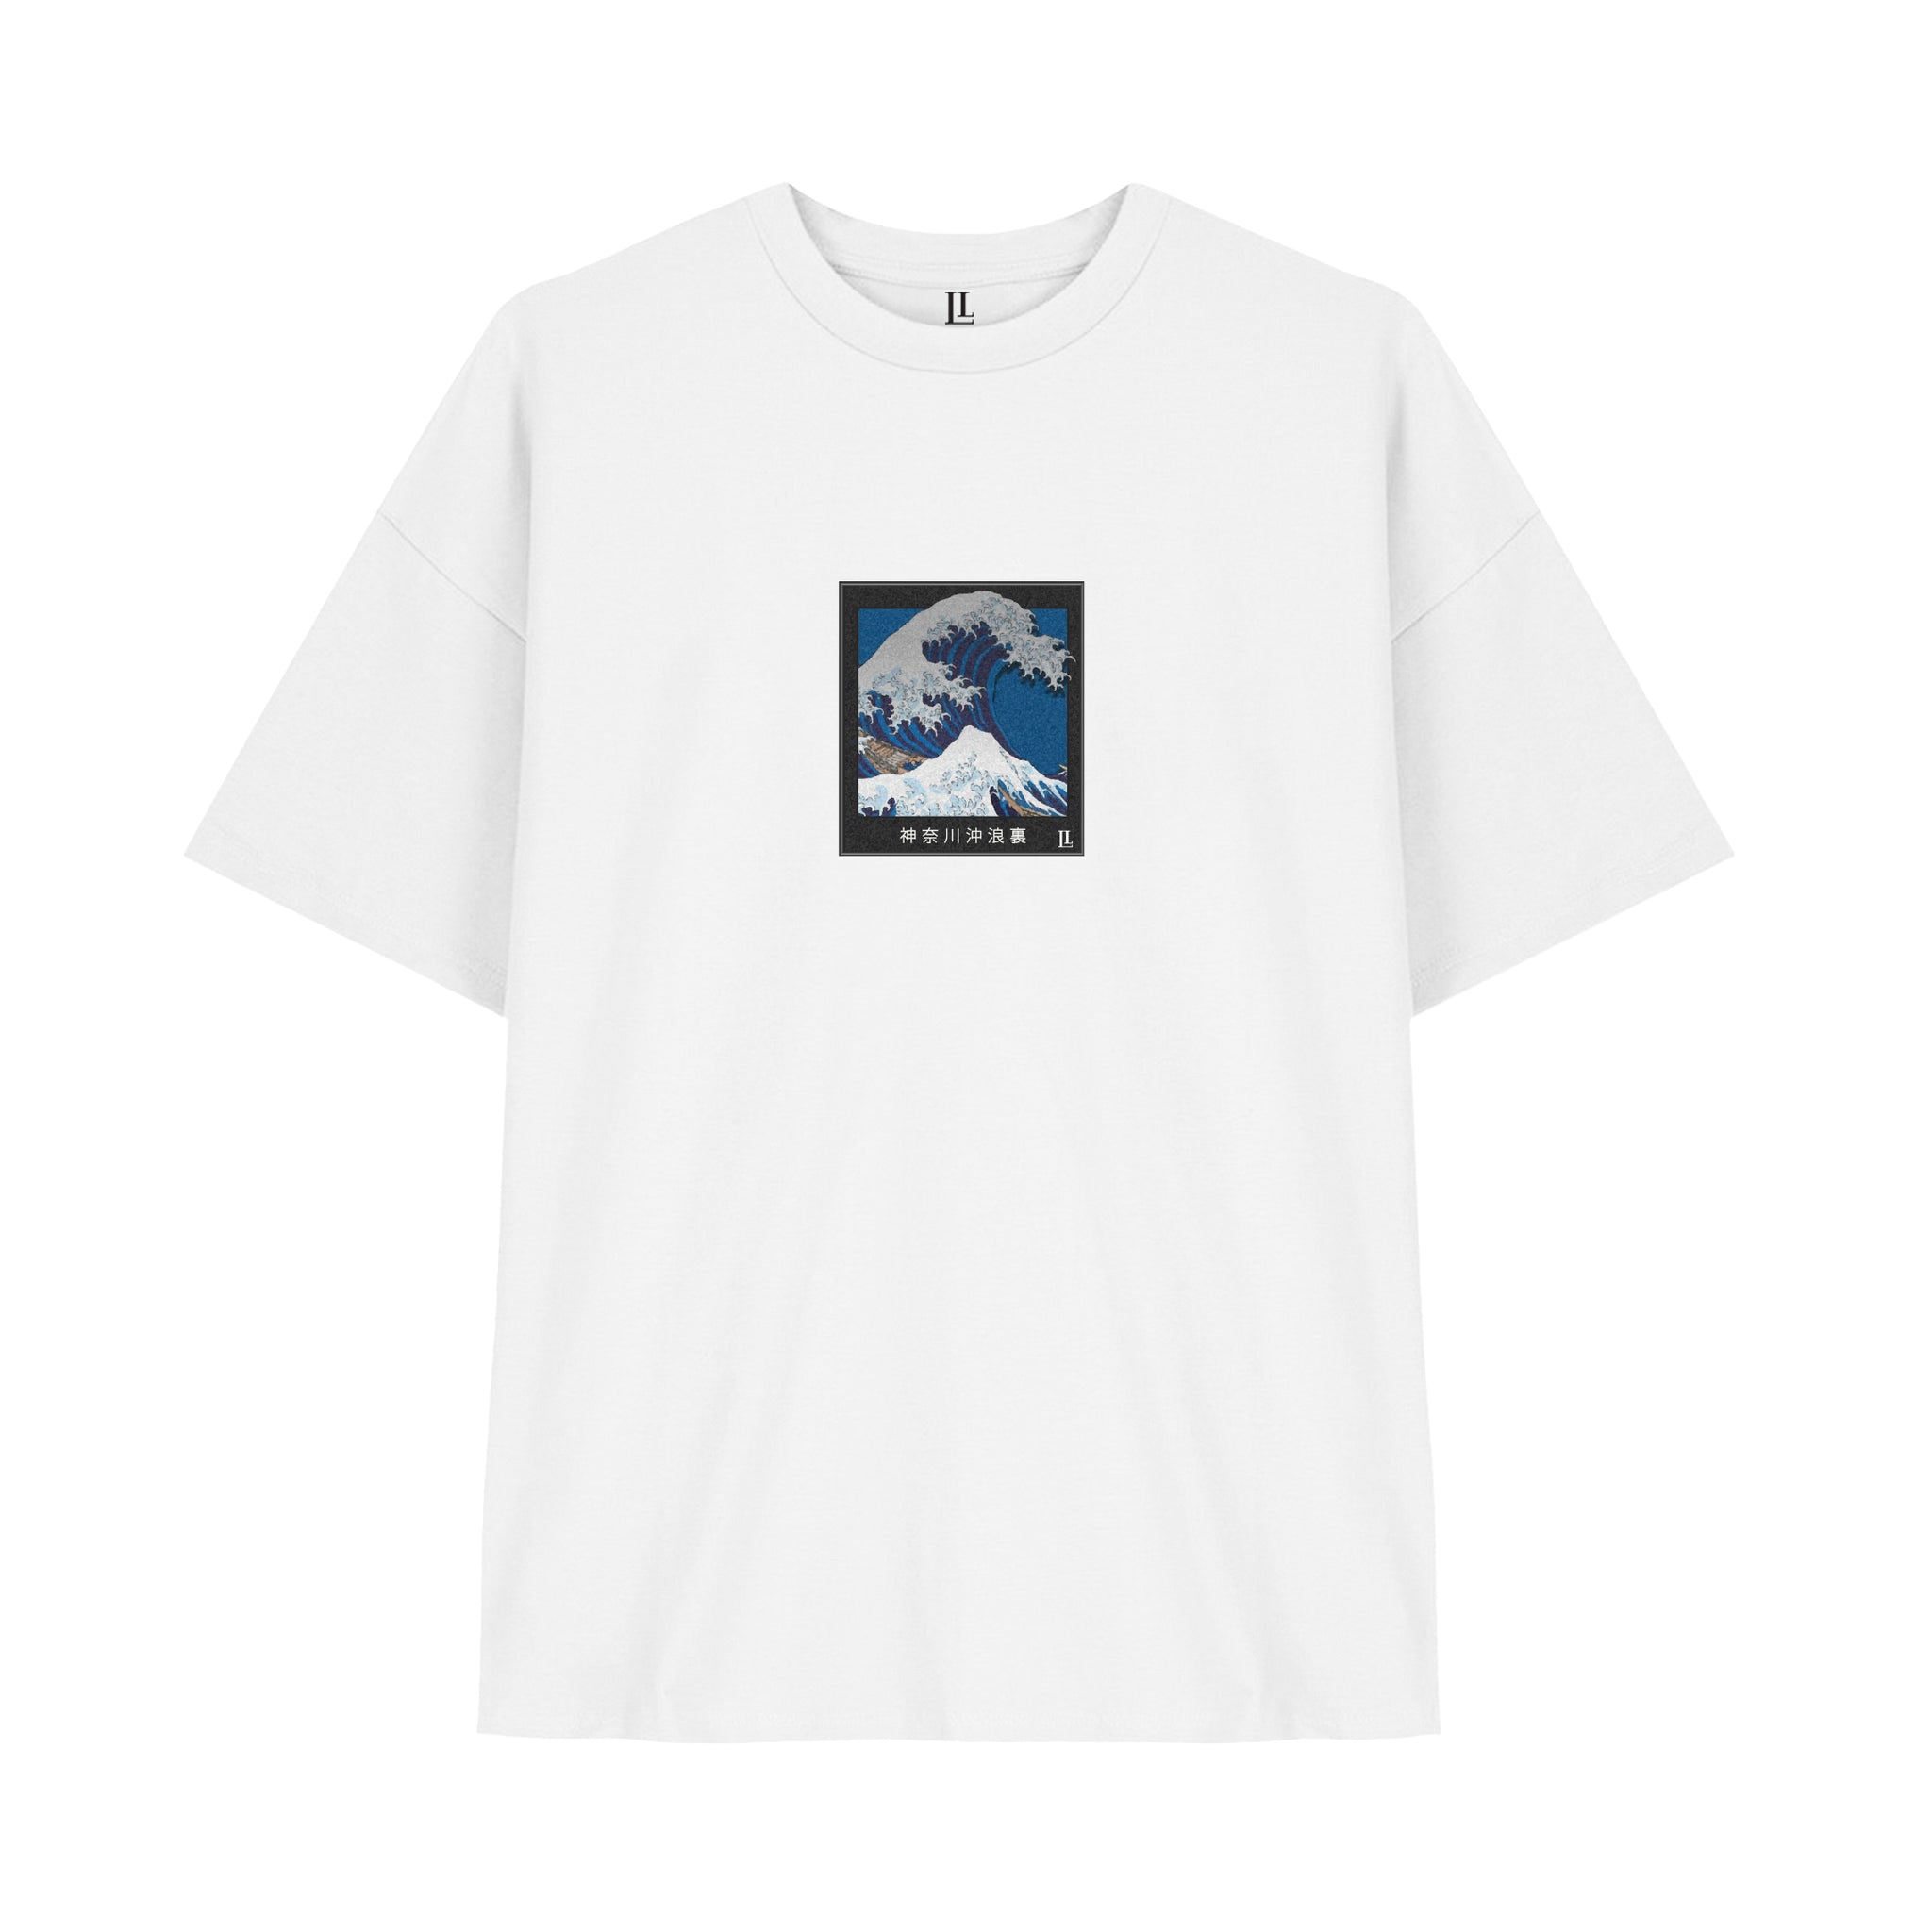 Oversize T-Shirt "Great Wave"